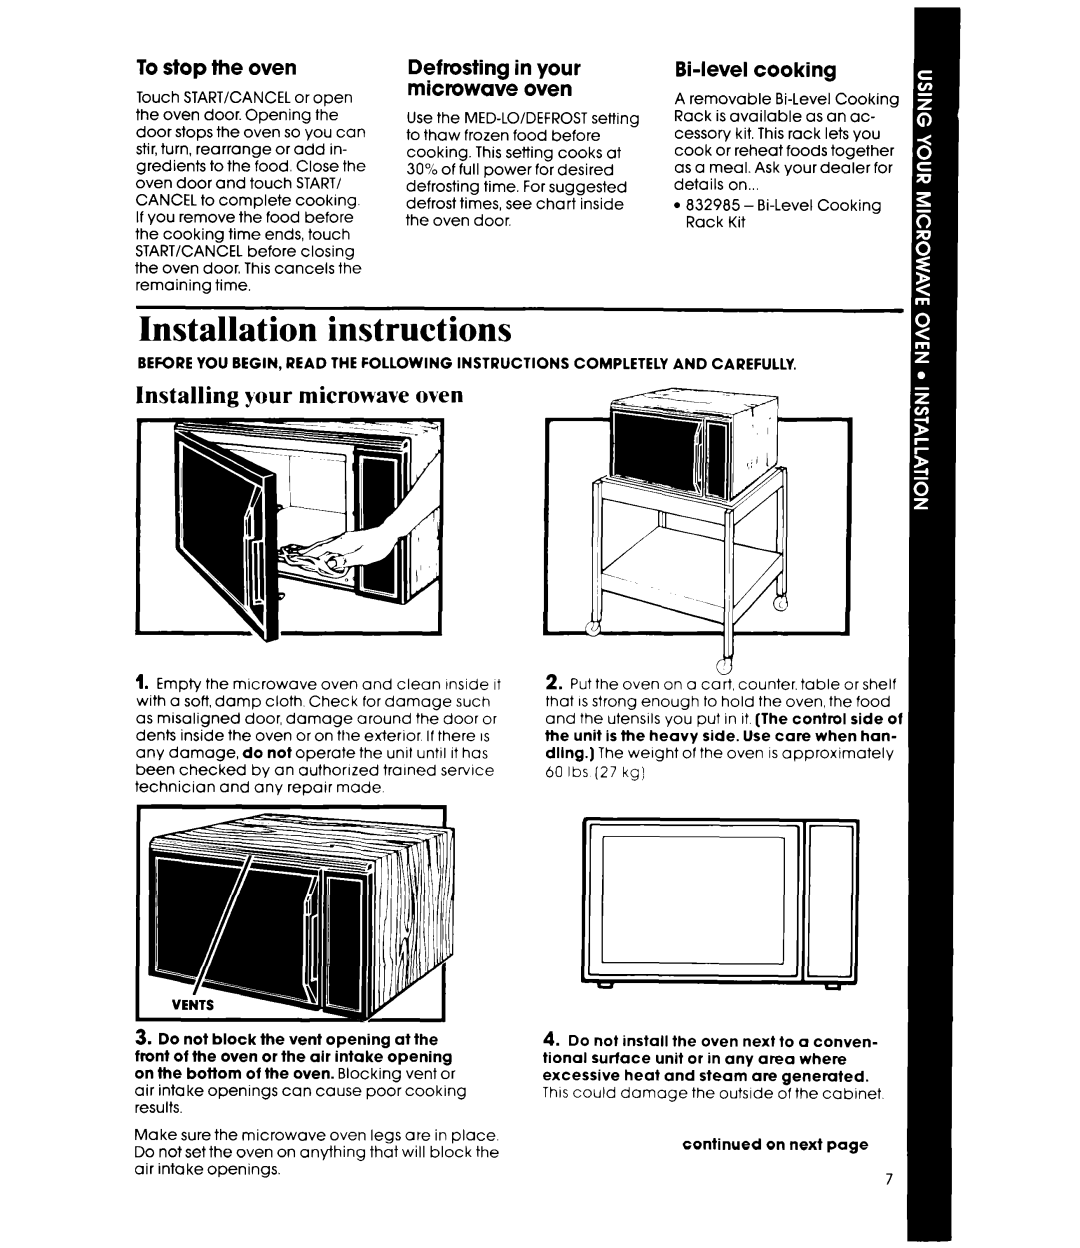 Whirlpool MW8500XS manual Installation instructions, Installing your microwave oven, To stop the oven, Bi-levelcooking 